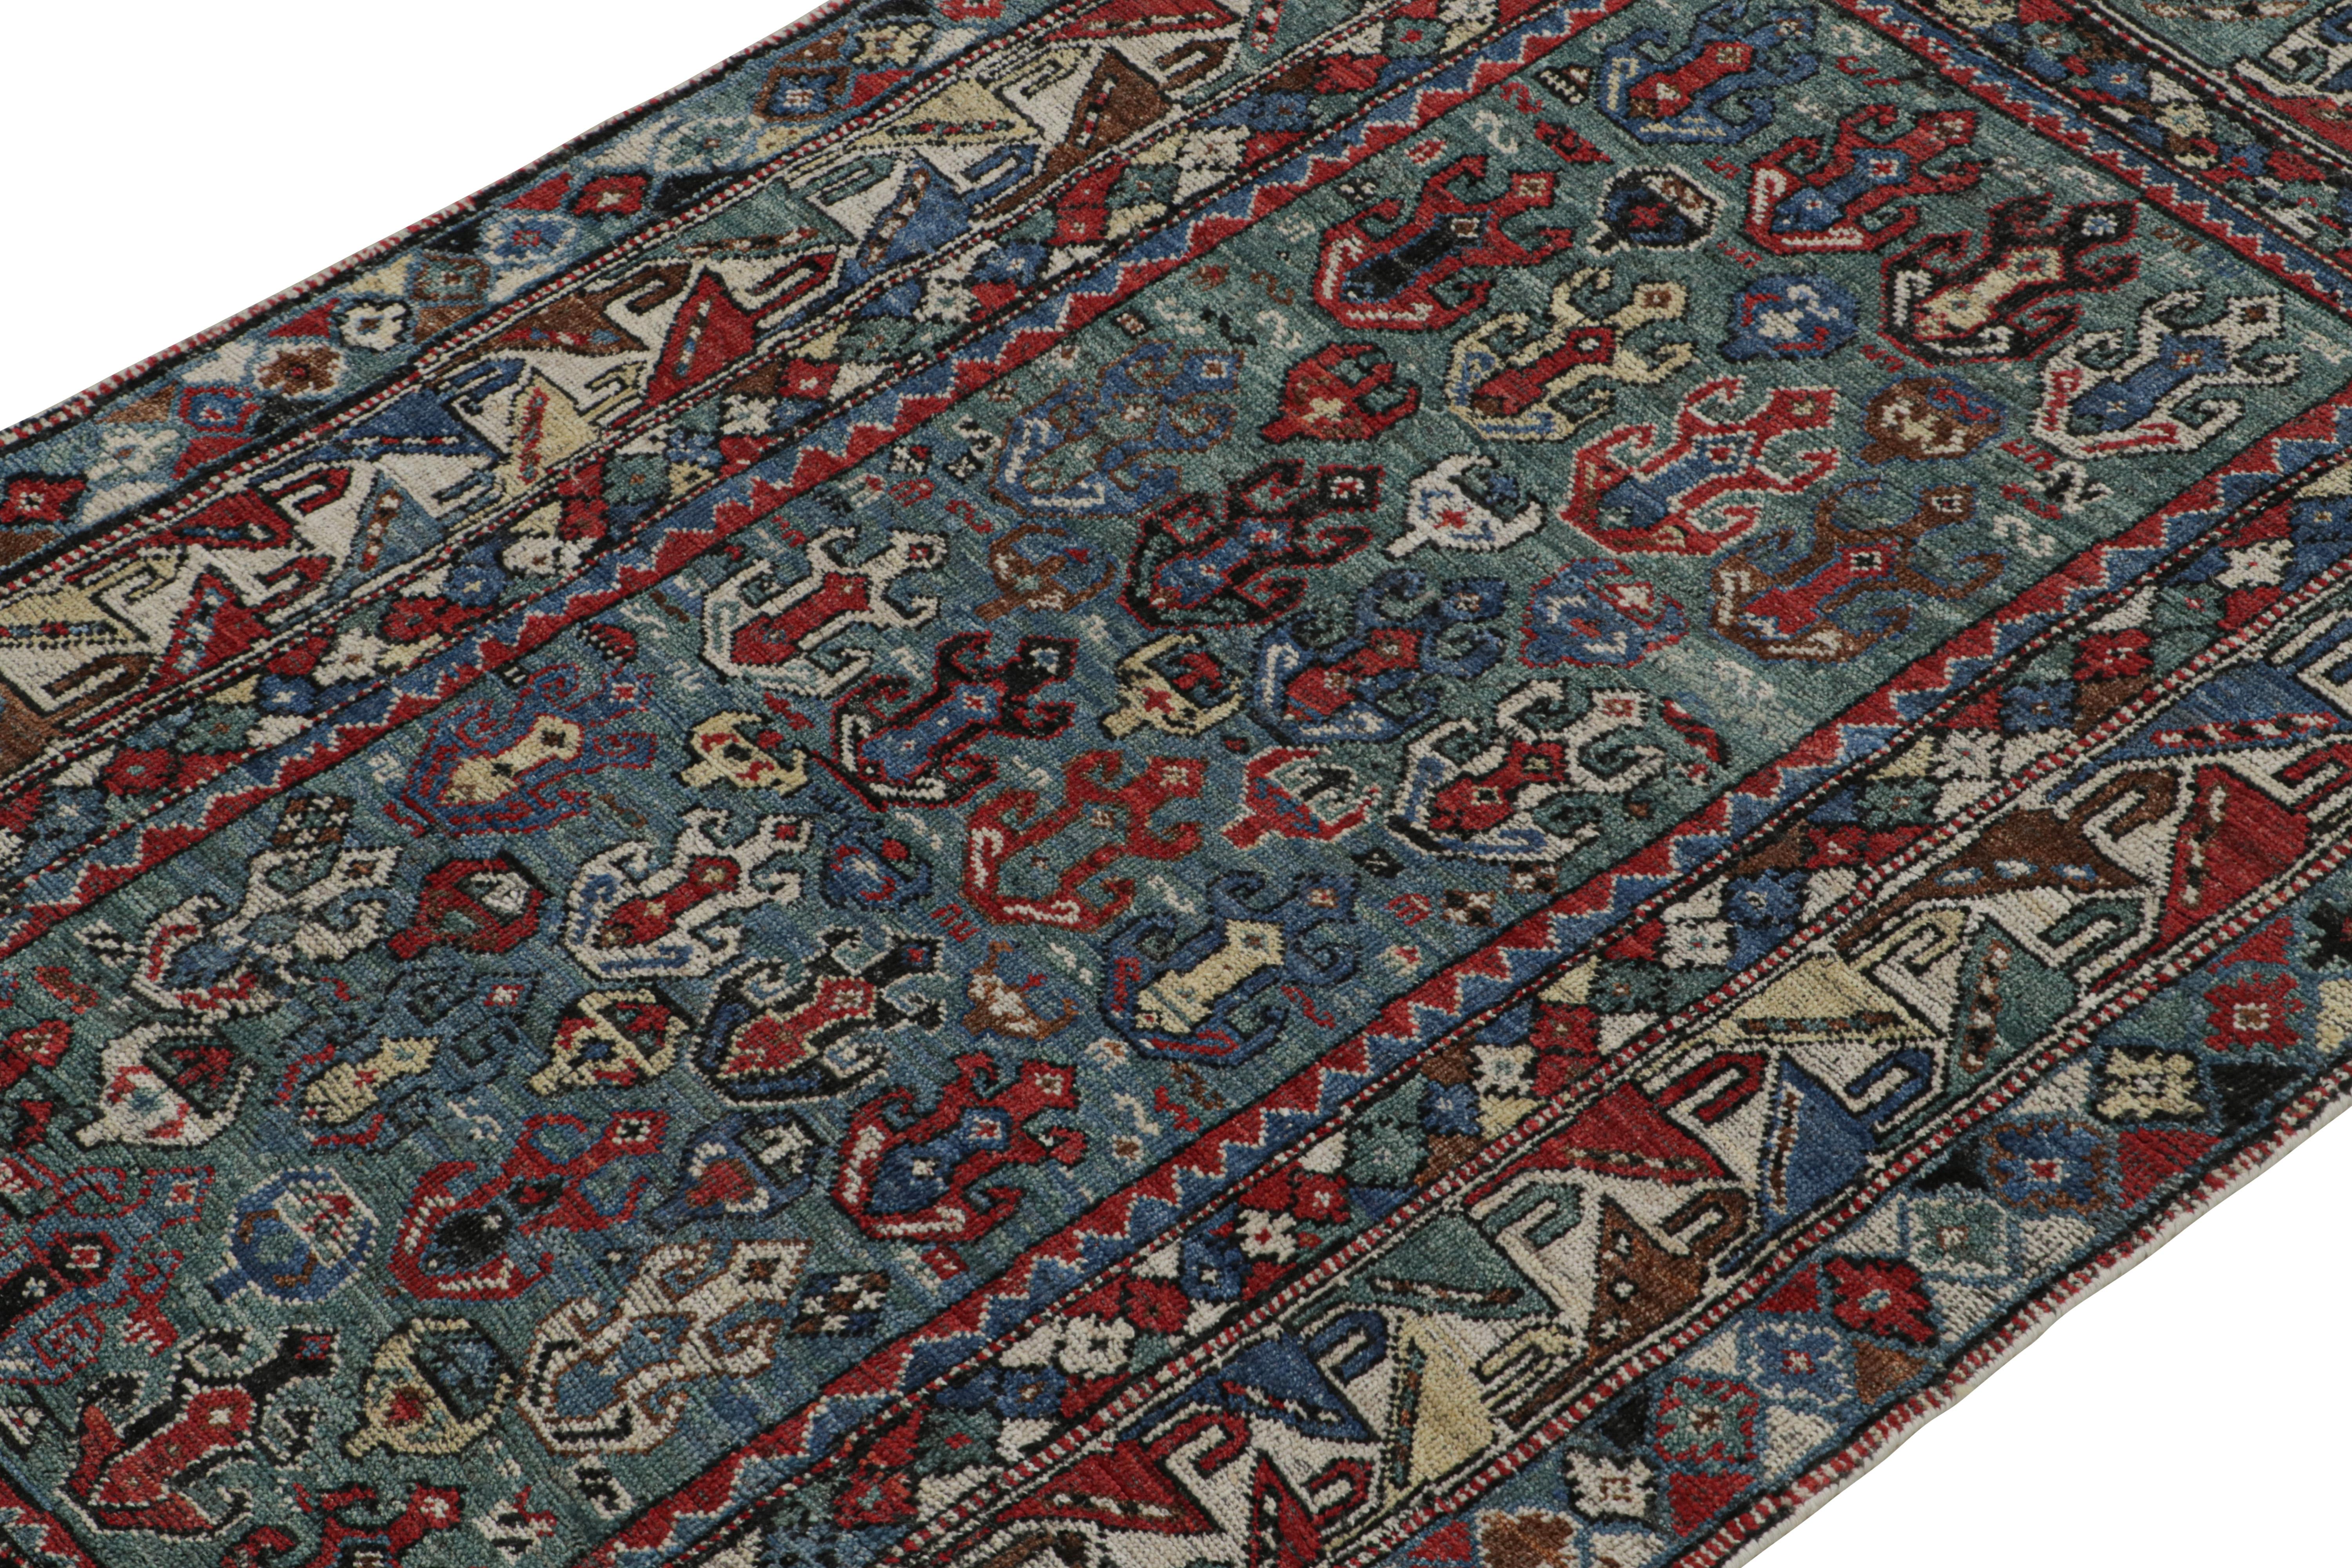 Hand-Knotted Rug & Kilim’s Tribal Style Rug in Green, Blue & Red Geometric Patterns